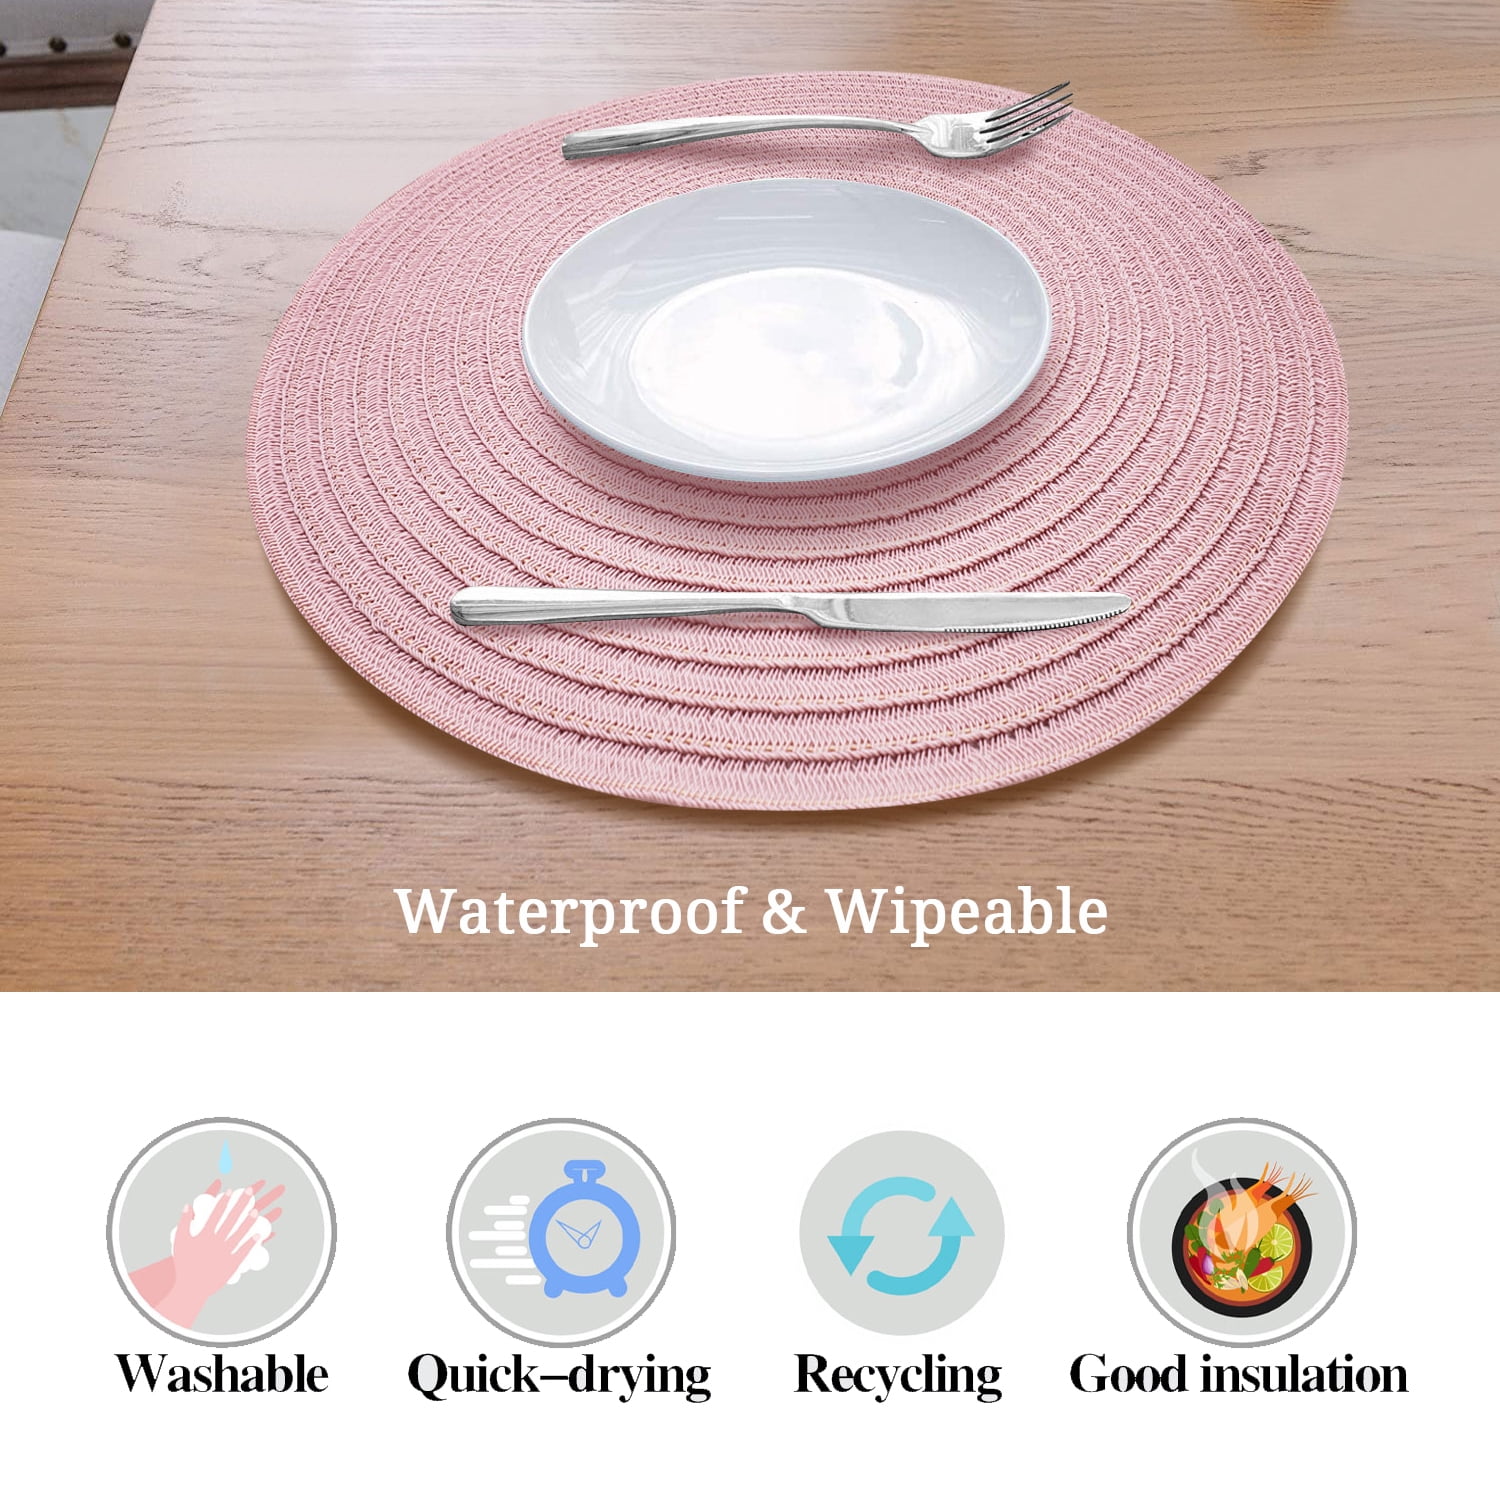 Circle Woven Table Mats Vinyl Waterproof Washable Heat Resistant Non Slip Wipeable Place Mats for Round Kitchen Table 15 inch Dark Brown Round Braided Placemats Set of 4 for Dining Table